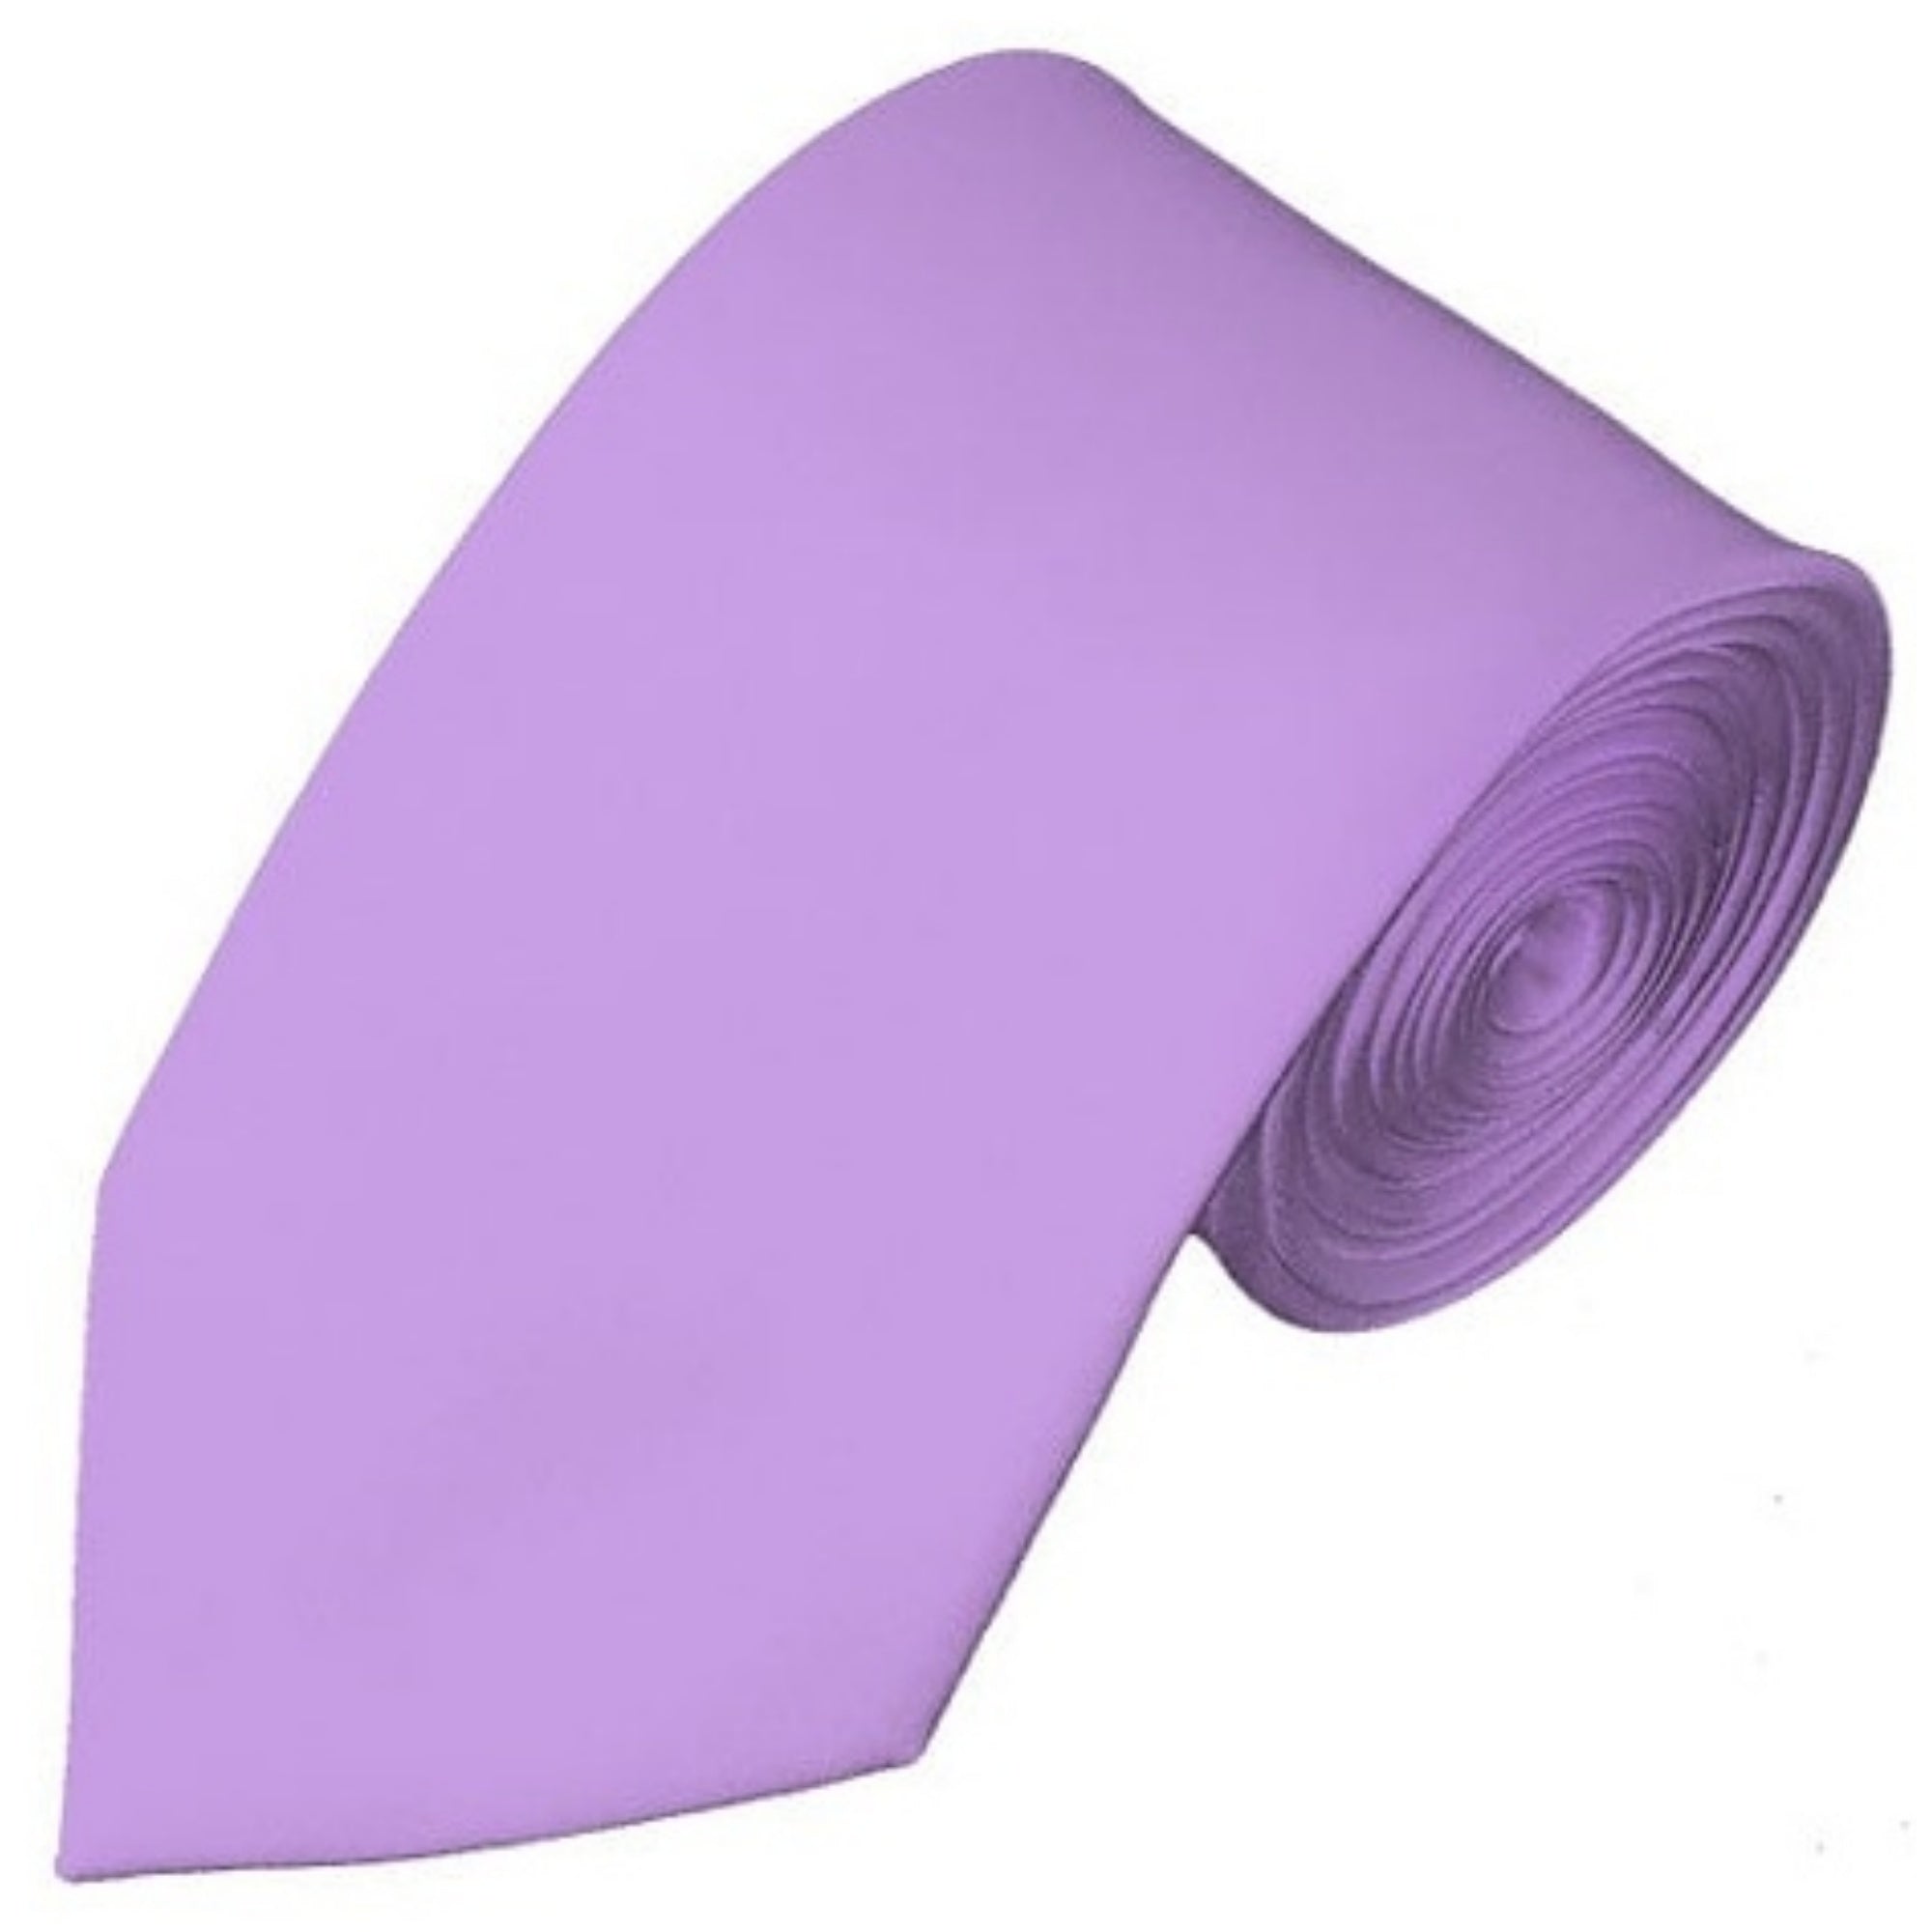 TheDapperTie Men's Solid Color Slim 2.75 Inch Wide And 58 Inch Long Neckties Neck Tie TheDapperTie Lavender  